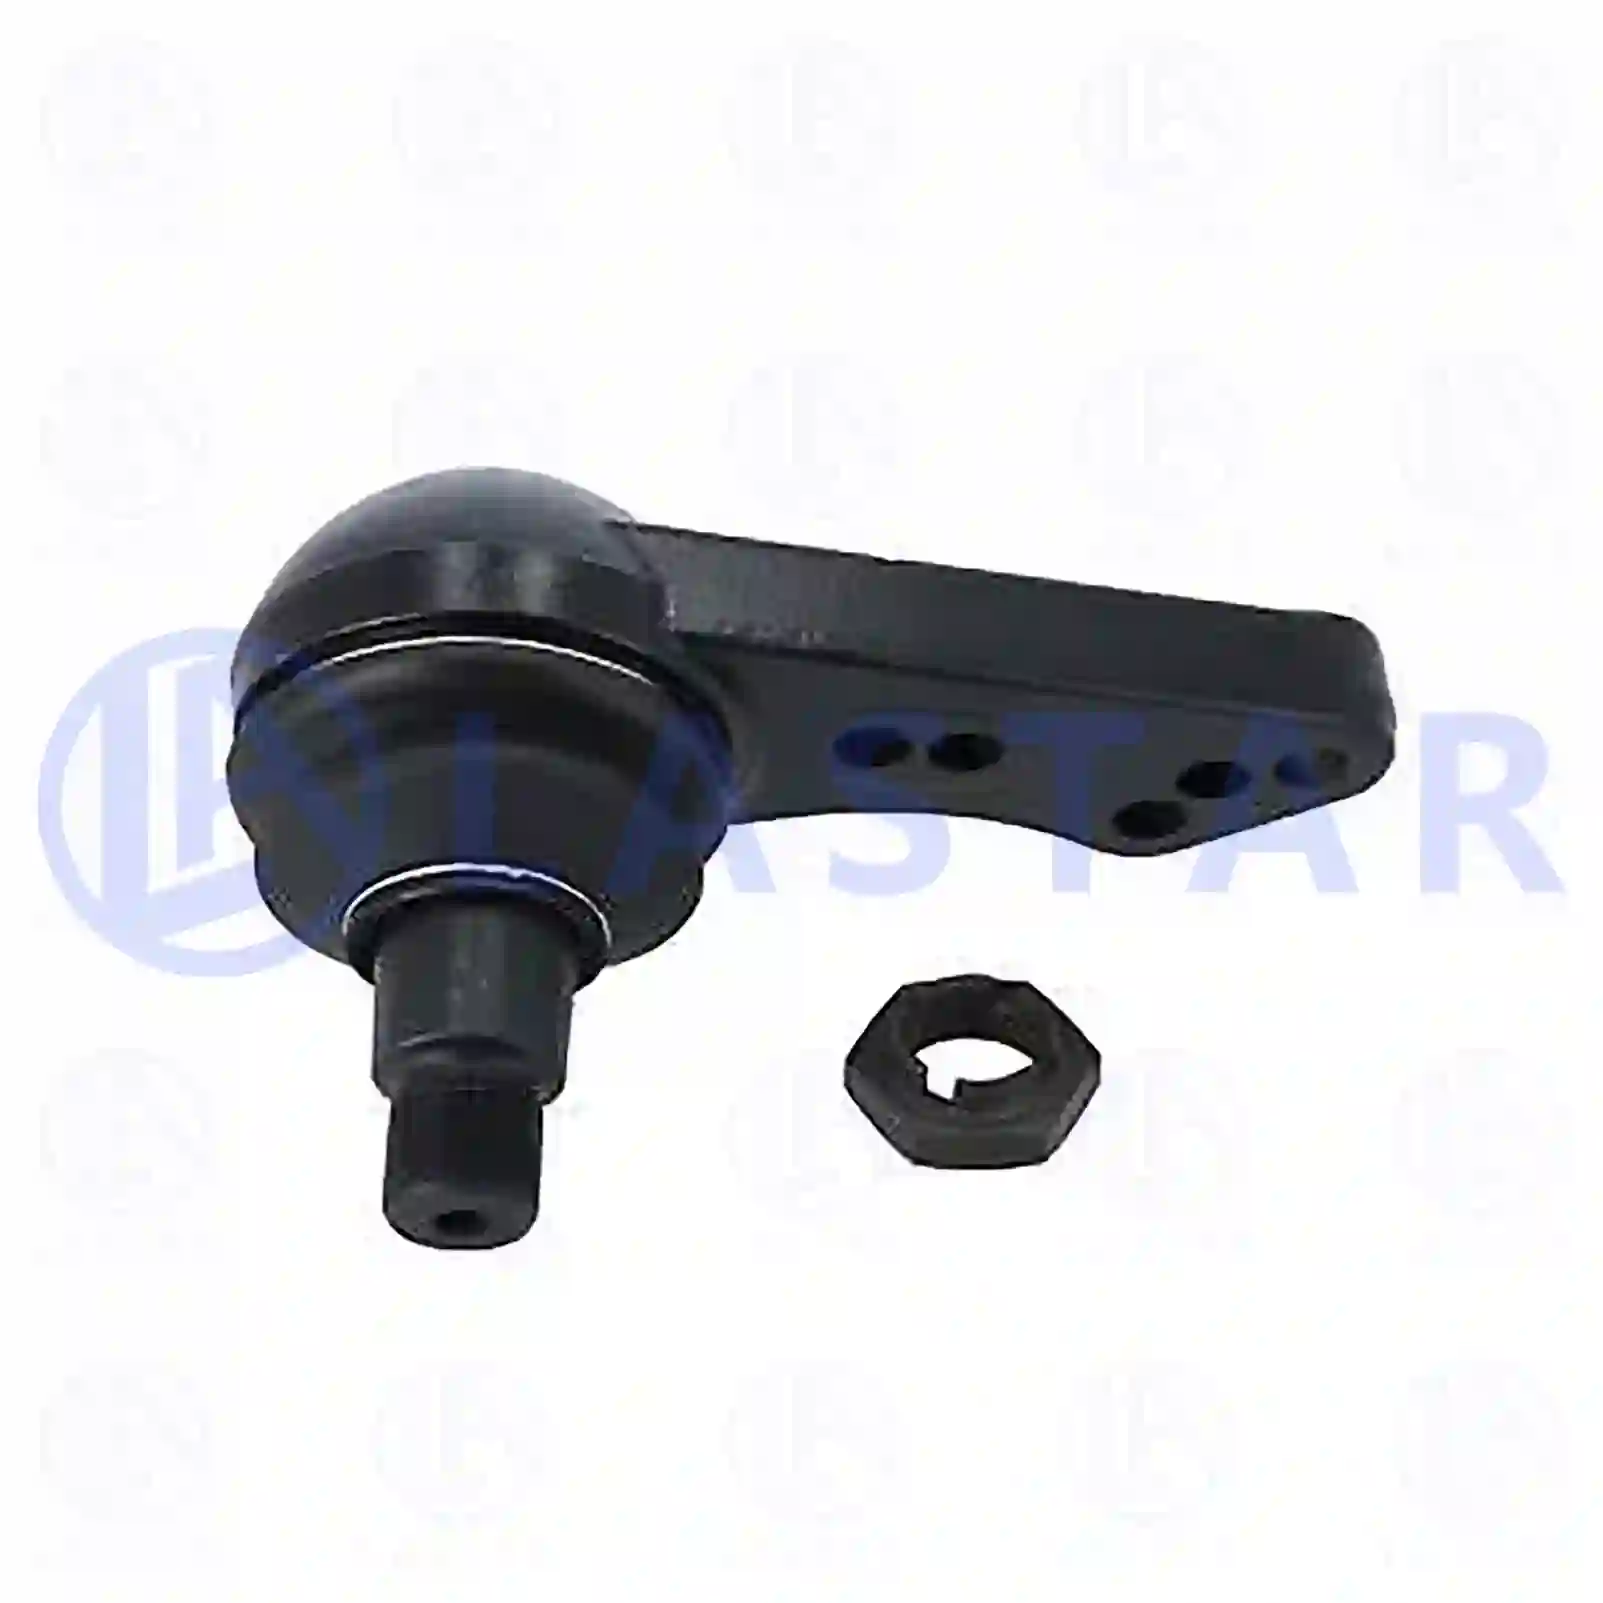 Ball joint, right, 77730363, 504127787 ||  77730363 Lastar Spare Part | Truck Spare Parts, Auotomotive Spare Parts Ball joint, right, 77730363, 504127787 ||  77730363 Lastar Spare Part | Truck Spare Parts, Auotomotive Spare Parts